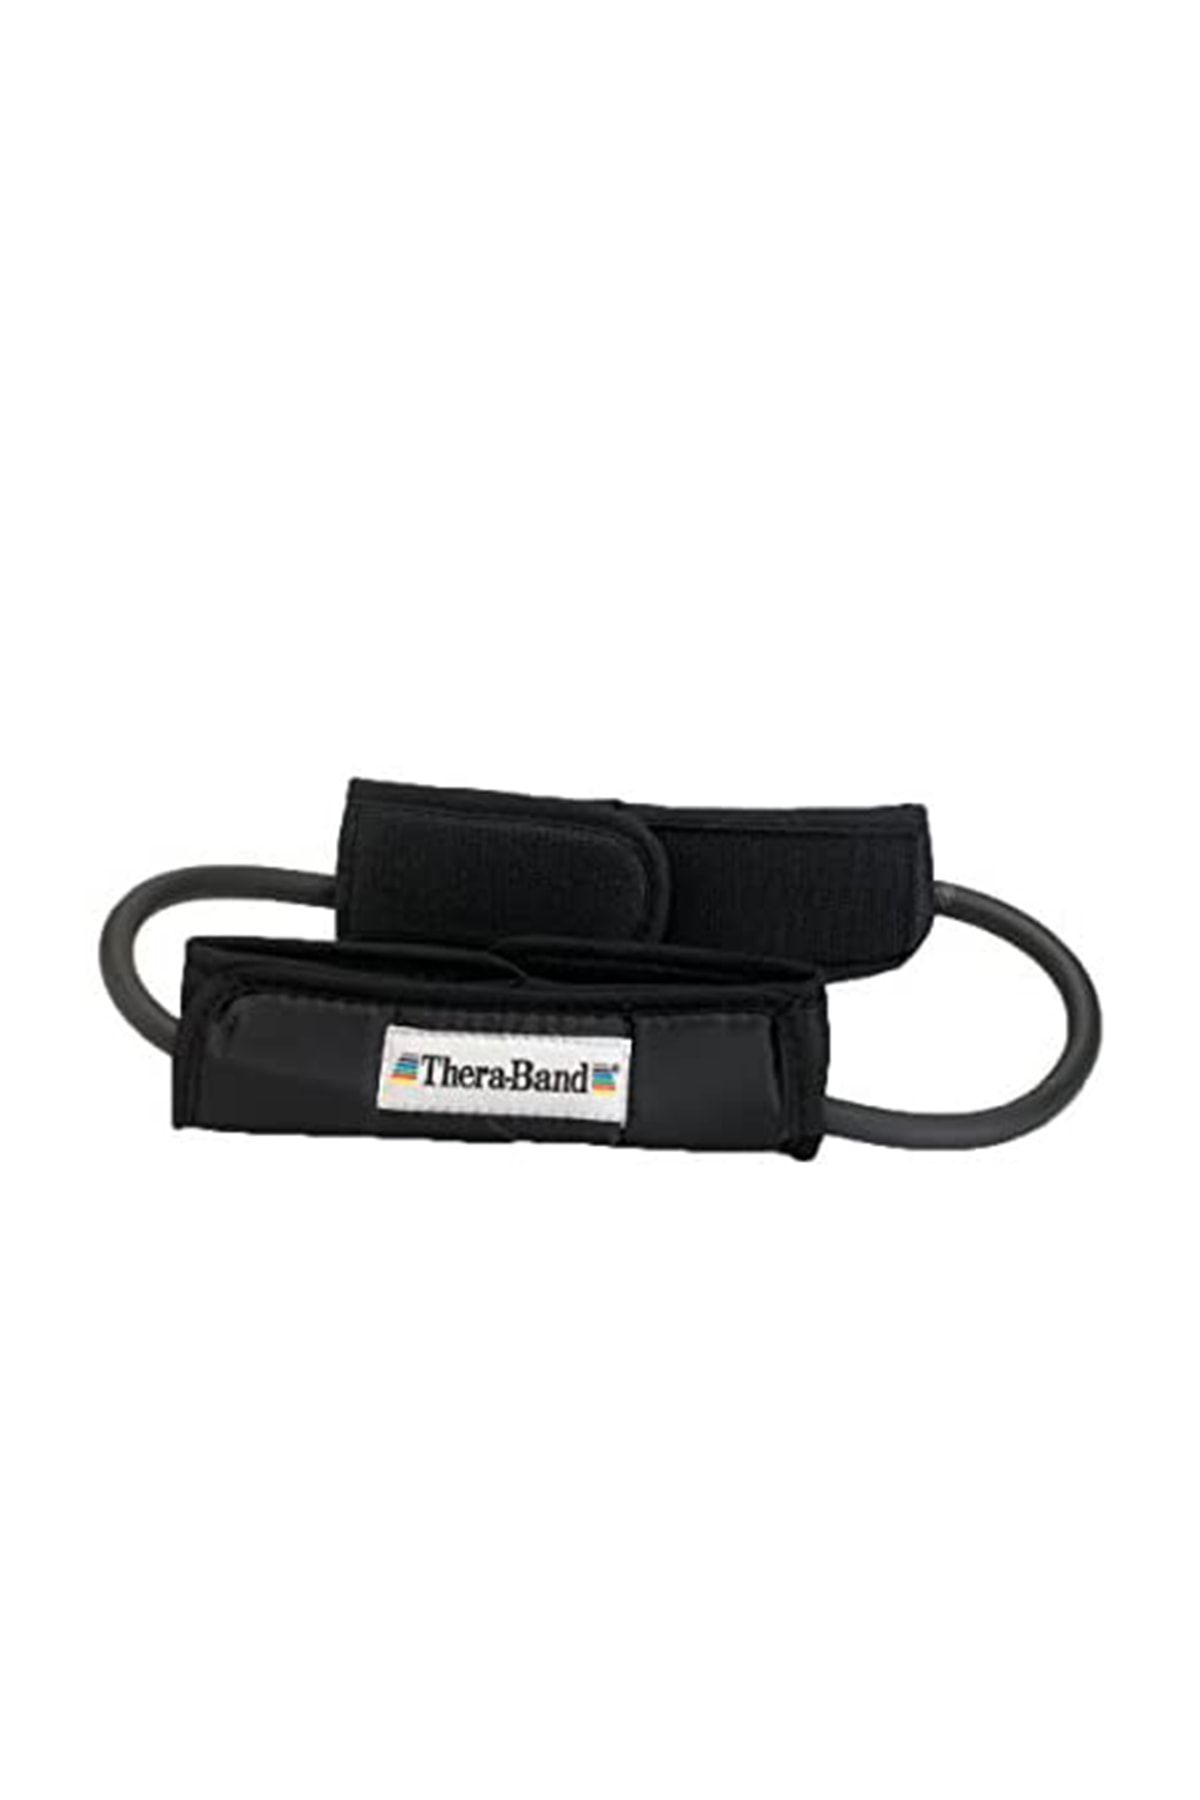 Theraband Blk Tubıng Loop W/padded Cuff